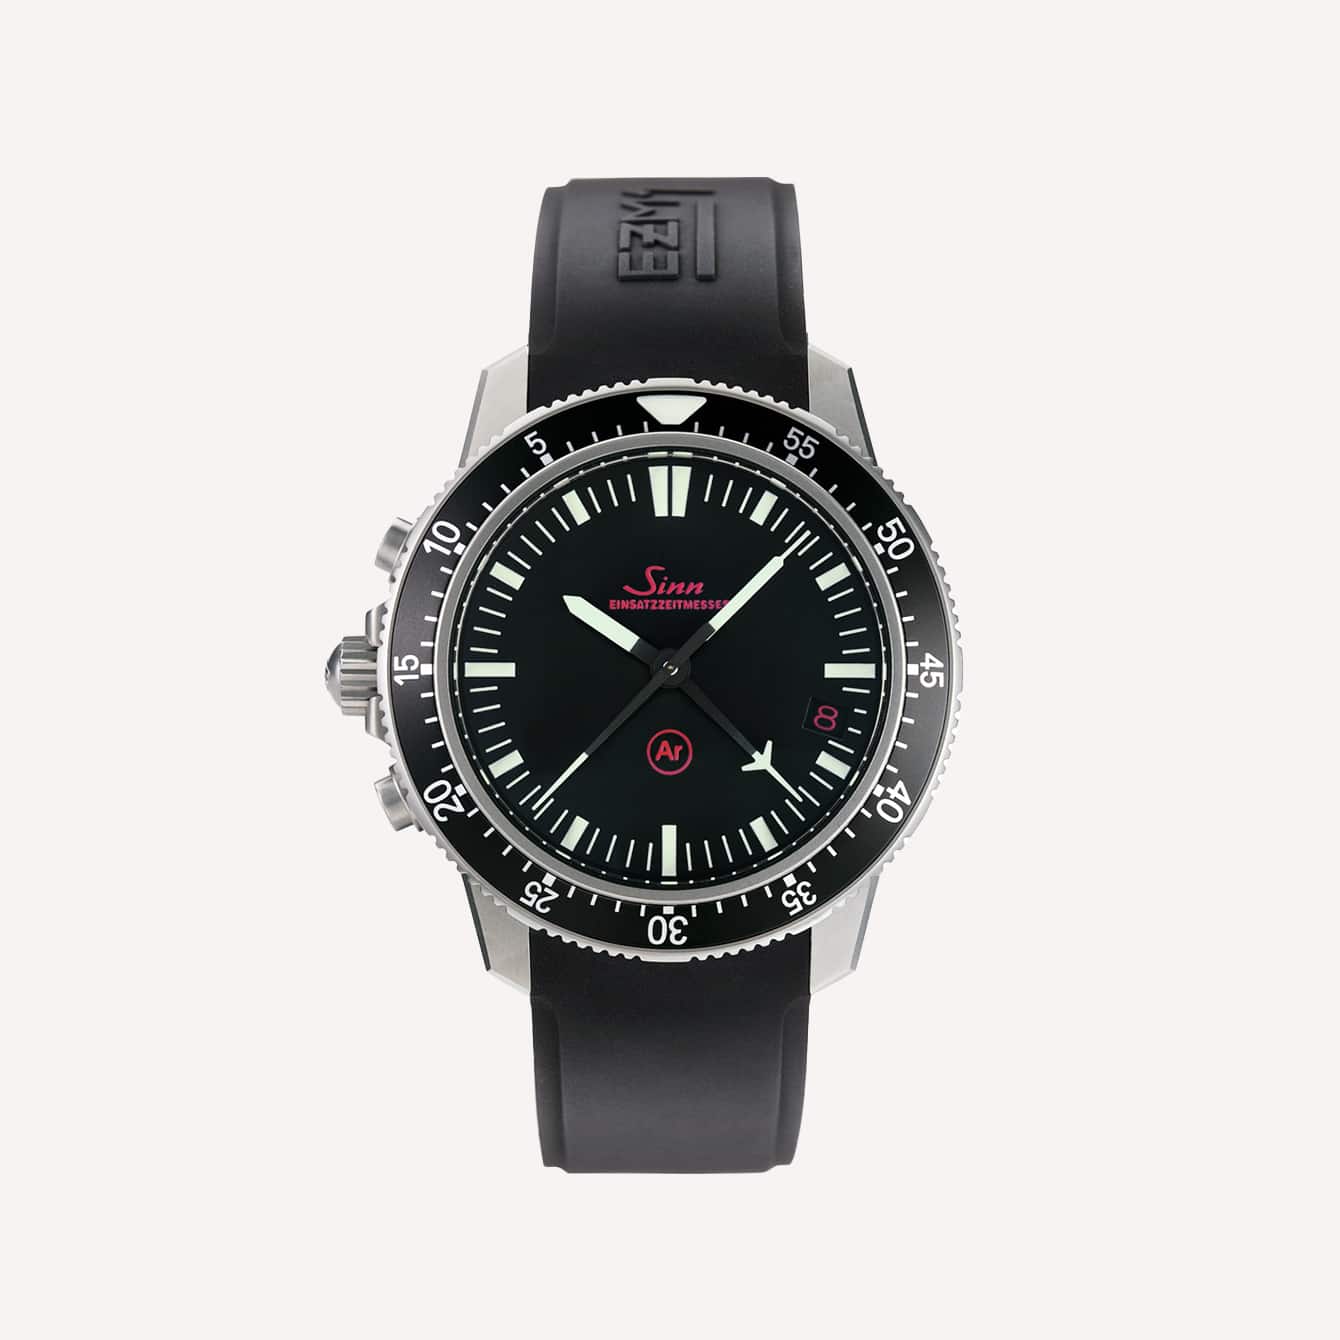 15 Best Military Watches-14